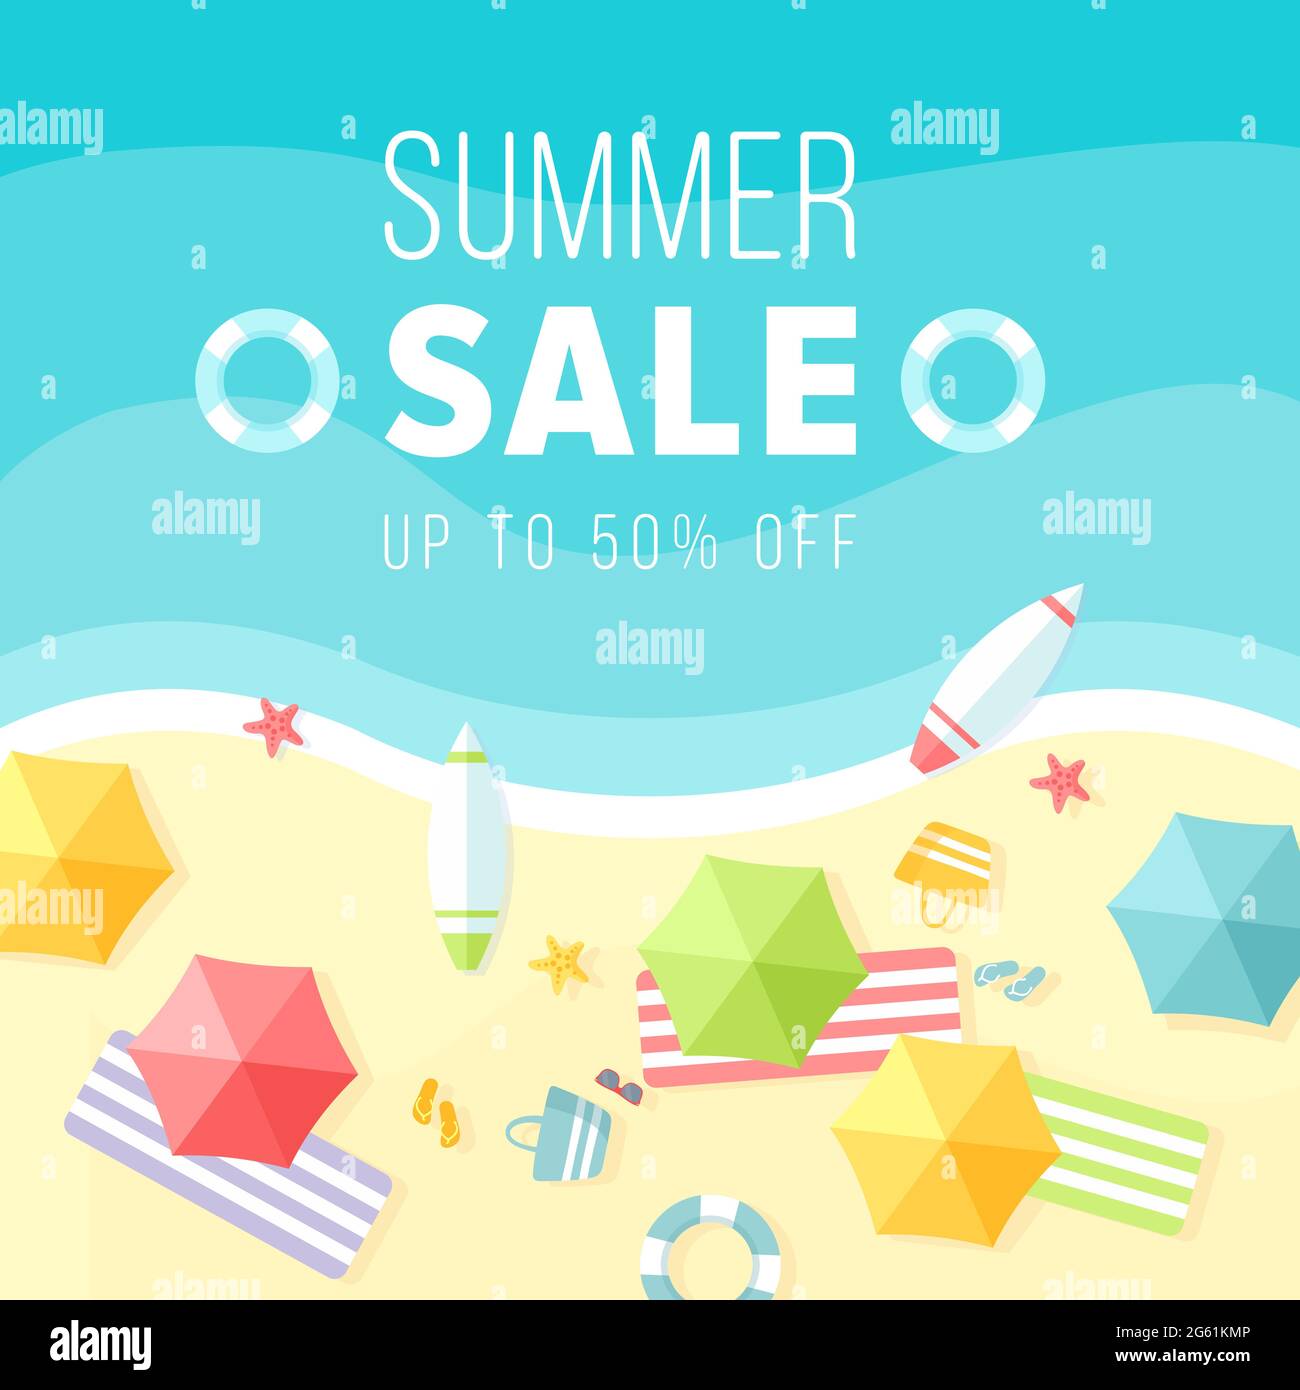 Cartoon flat sunny hot beach background in summertime with blue tropical sea wave, boats, umbrellas. Promo web banner, voucher offer for hot special Stock Vector